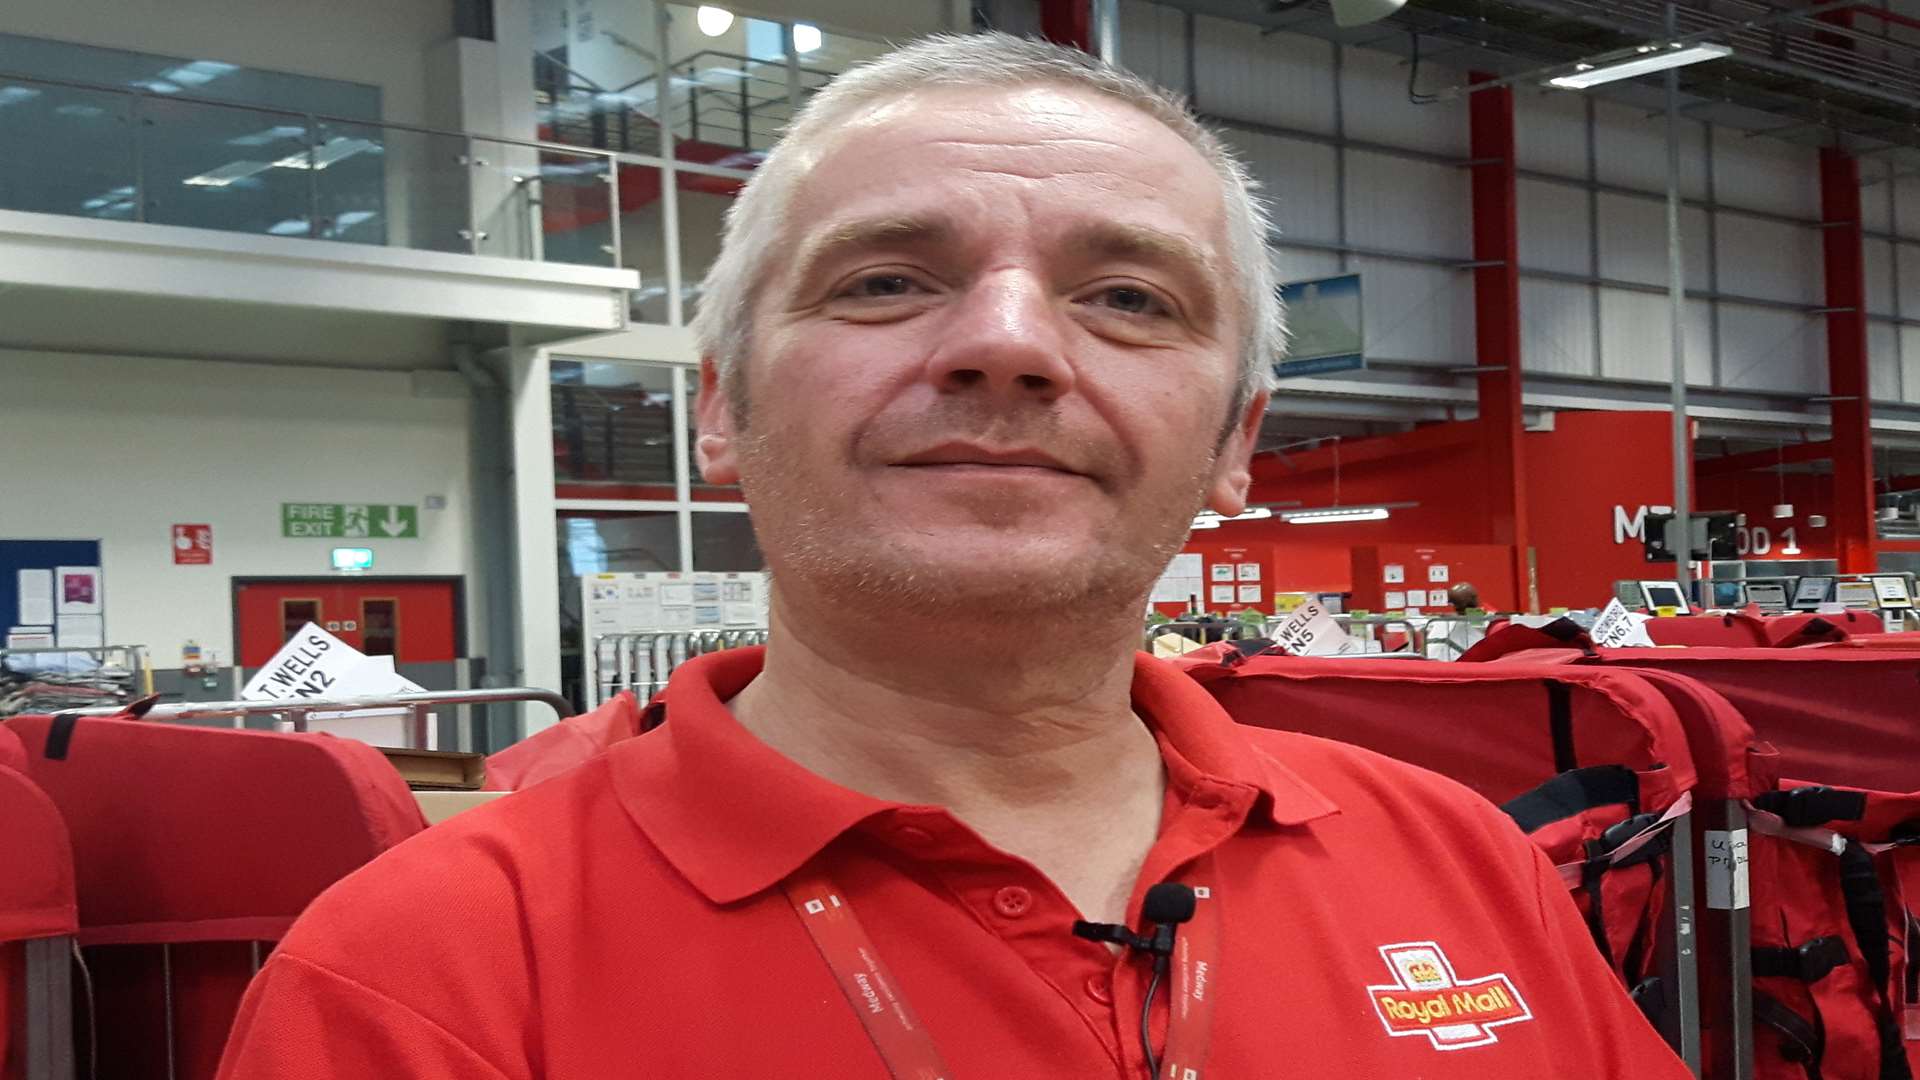 Dave Gardener has worked for Royal Mail for 28 years